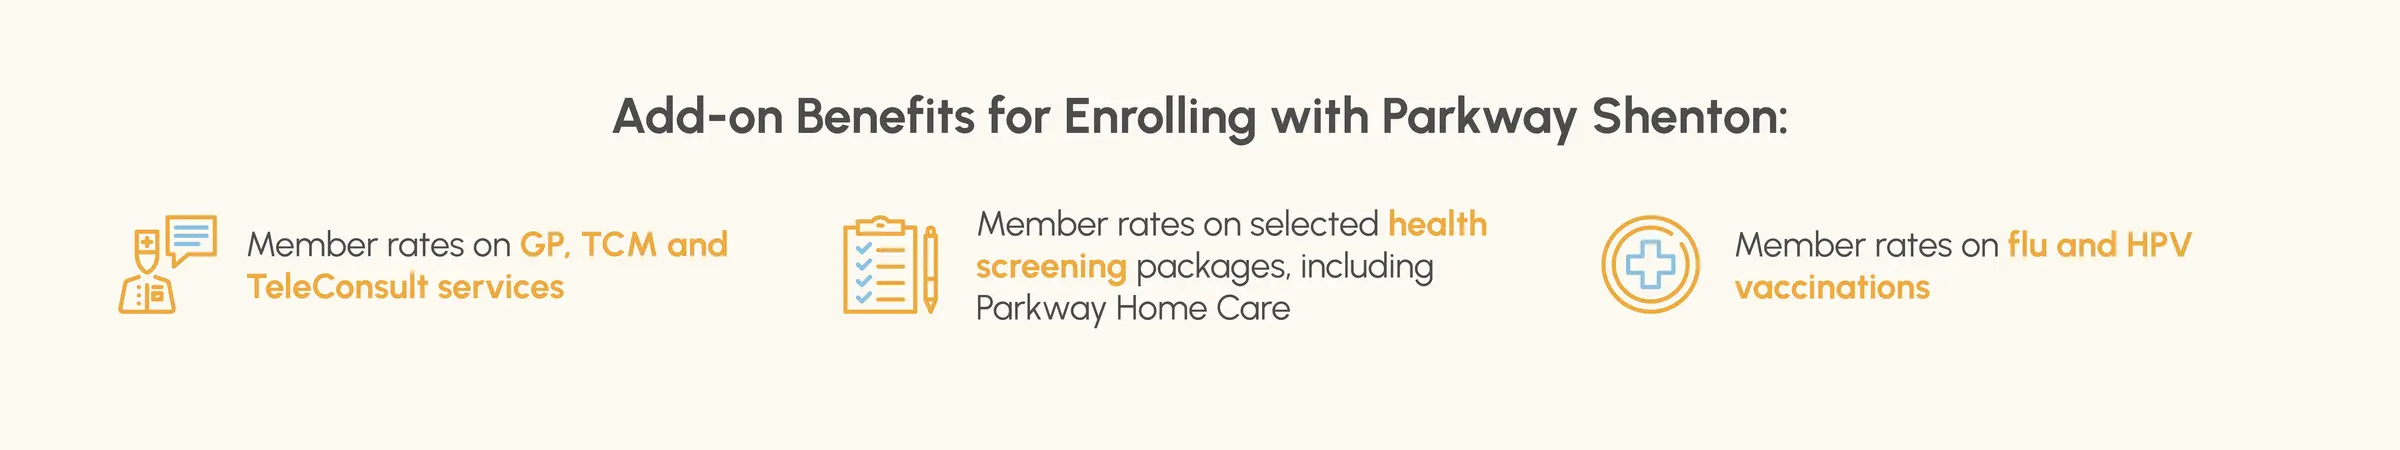 Add-on Benefits for Enrolling with Parkway Shenton